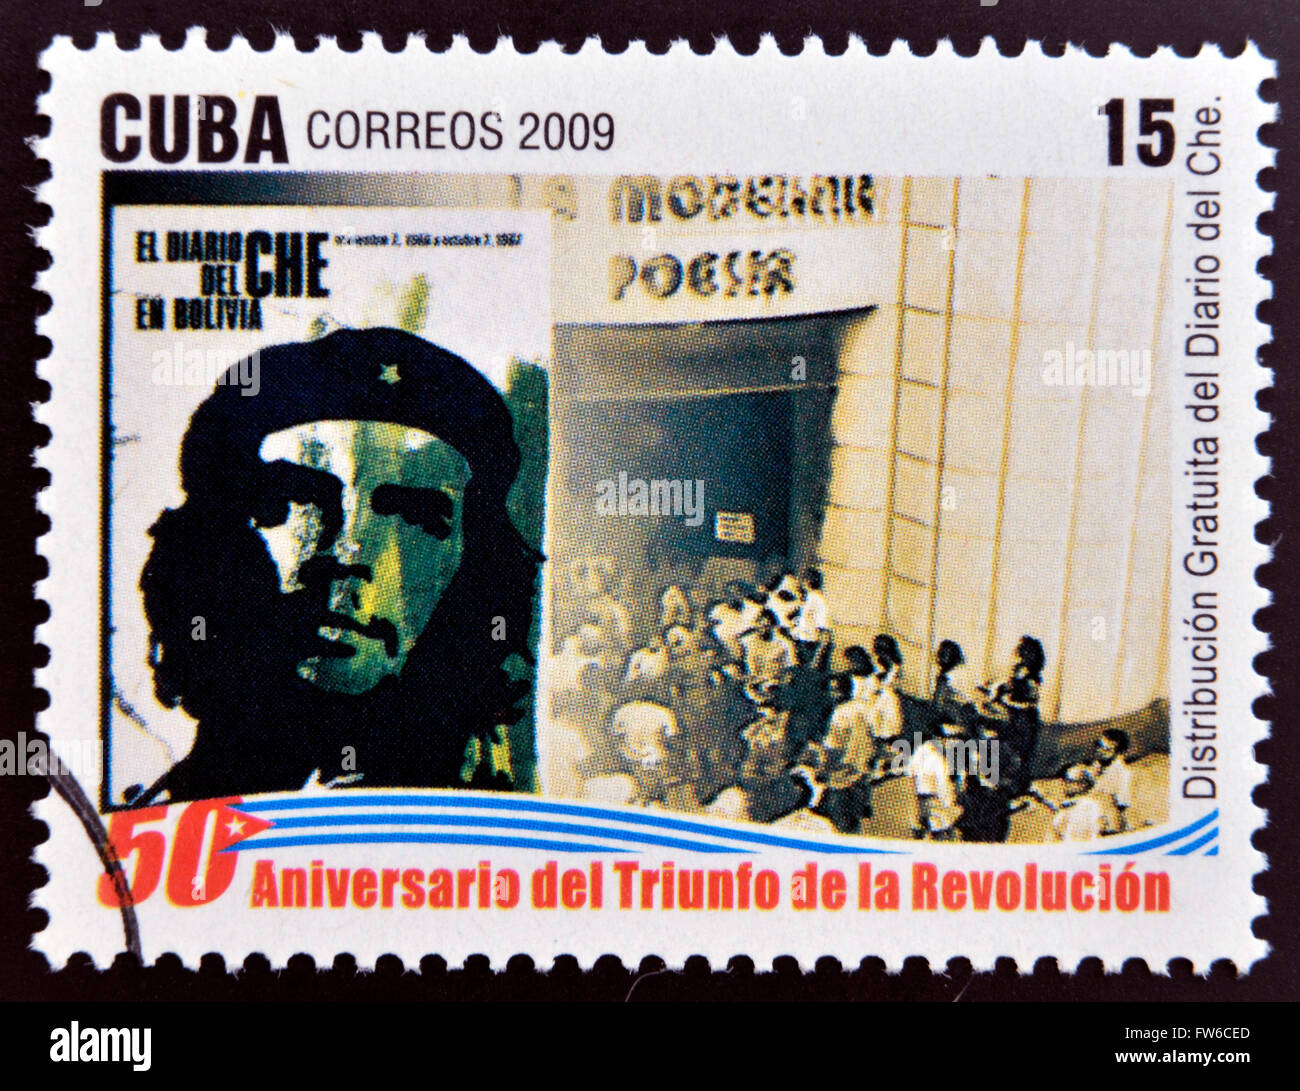 CUBA - CIRCA 2009: A stamp printed in cuba dedicated to 50 anniversary of the triumph of the revolution, shows free distribution Stock Photo